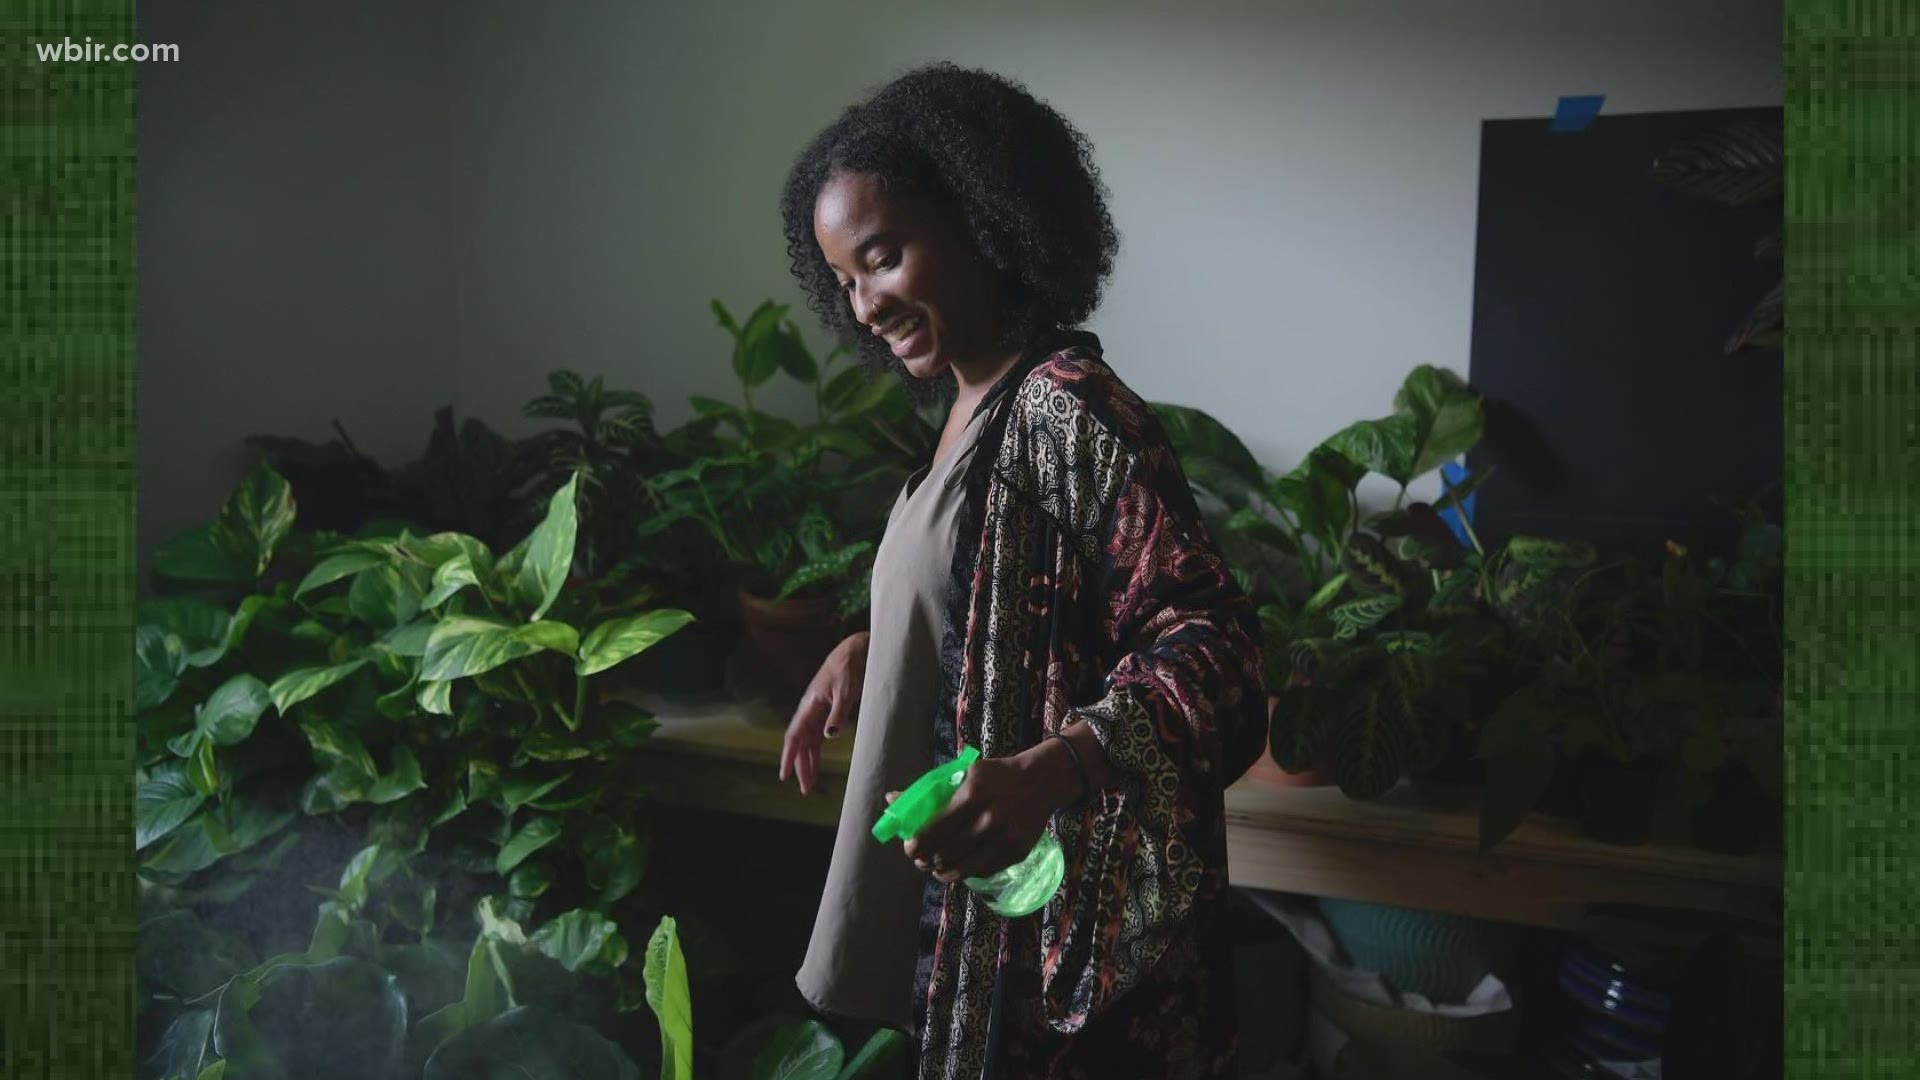 Houseplants always appealed to Jade Adams but it took the coronavirus to convince her to transform her hobby into a business